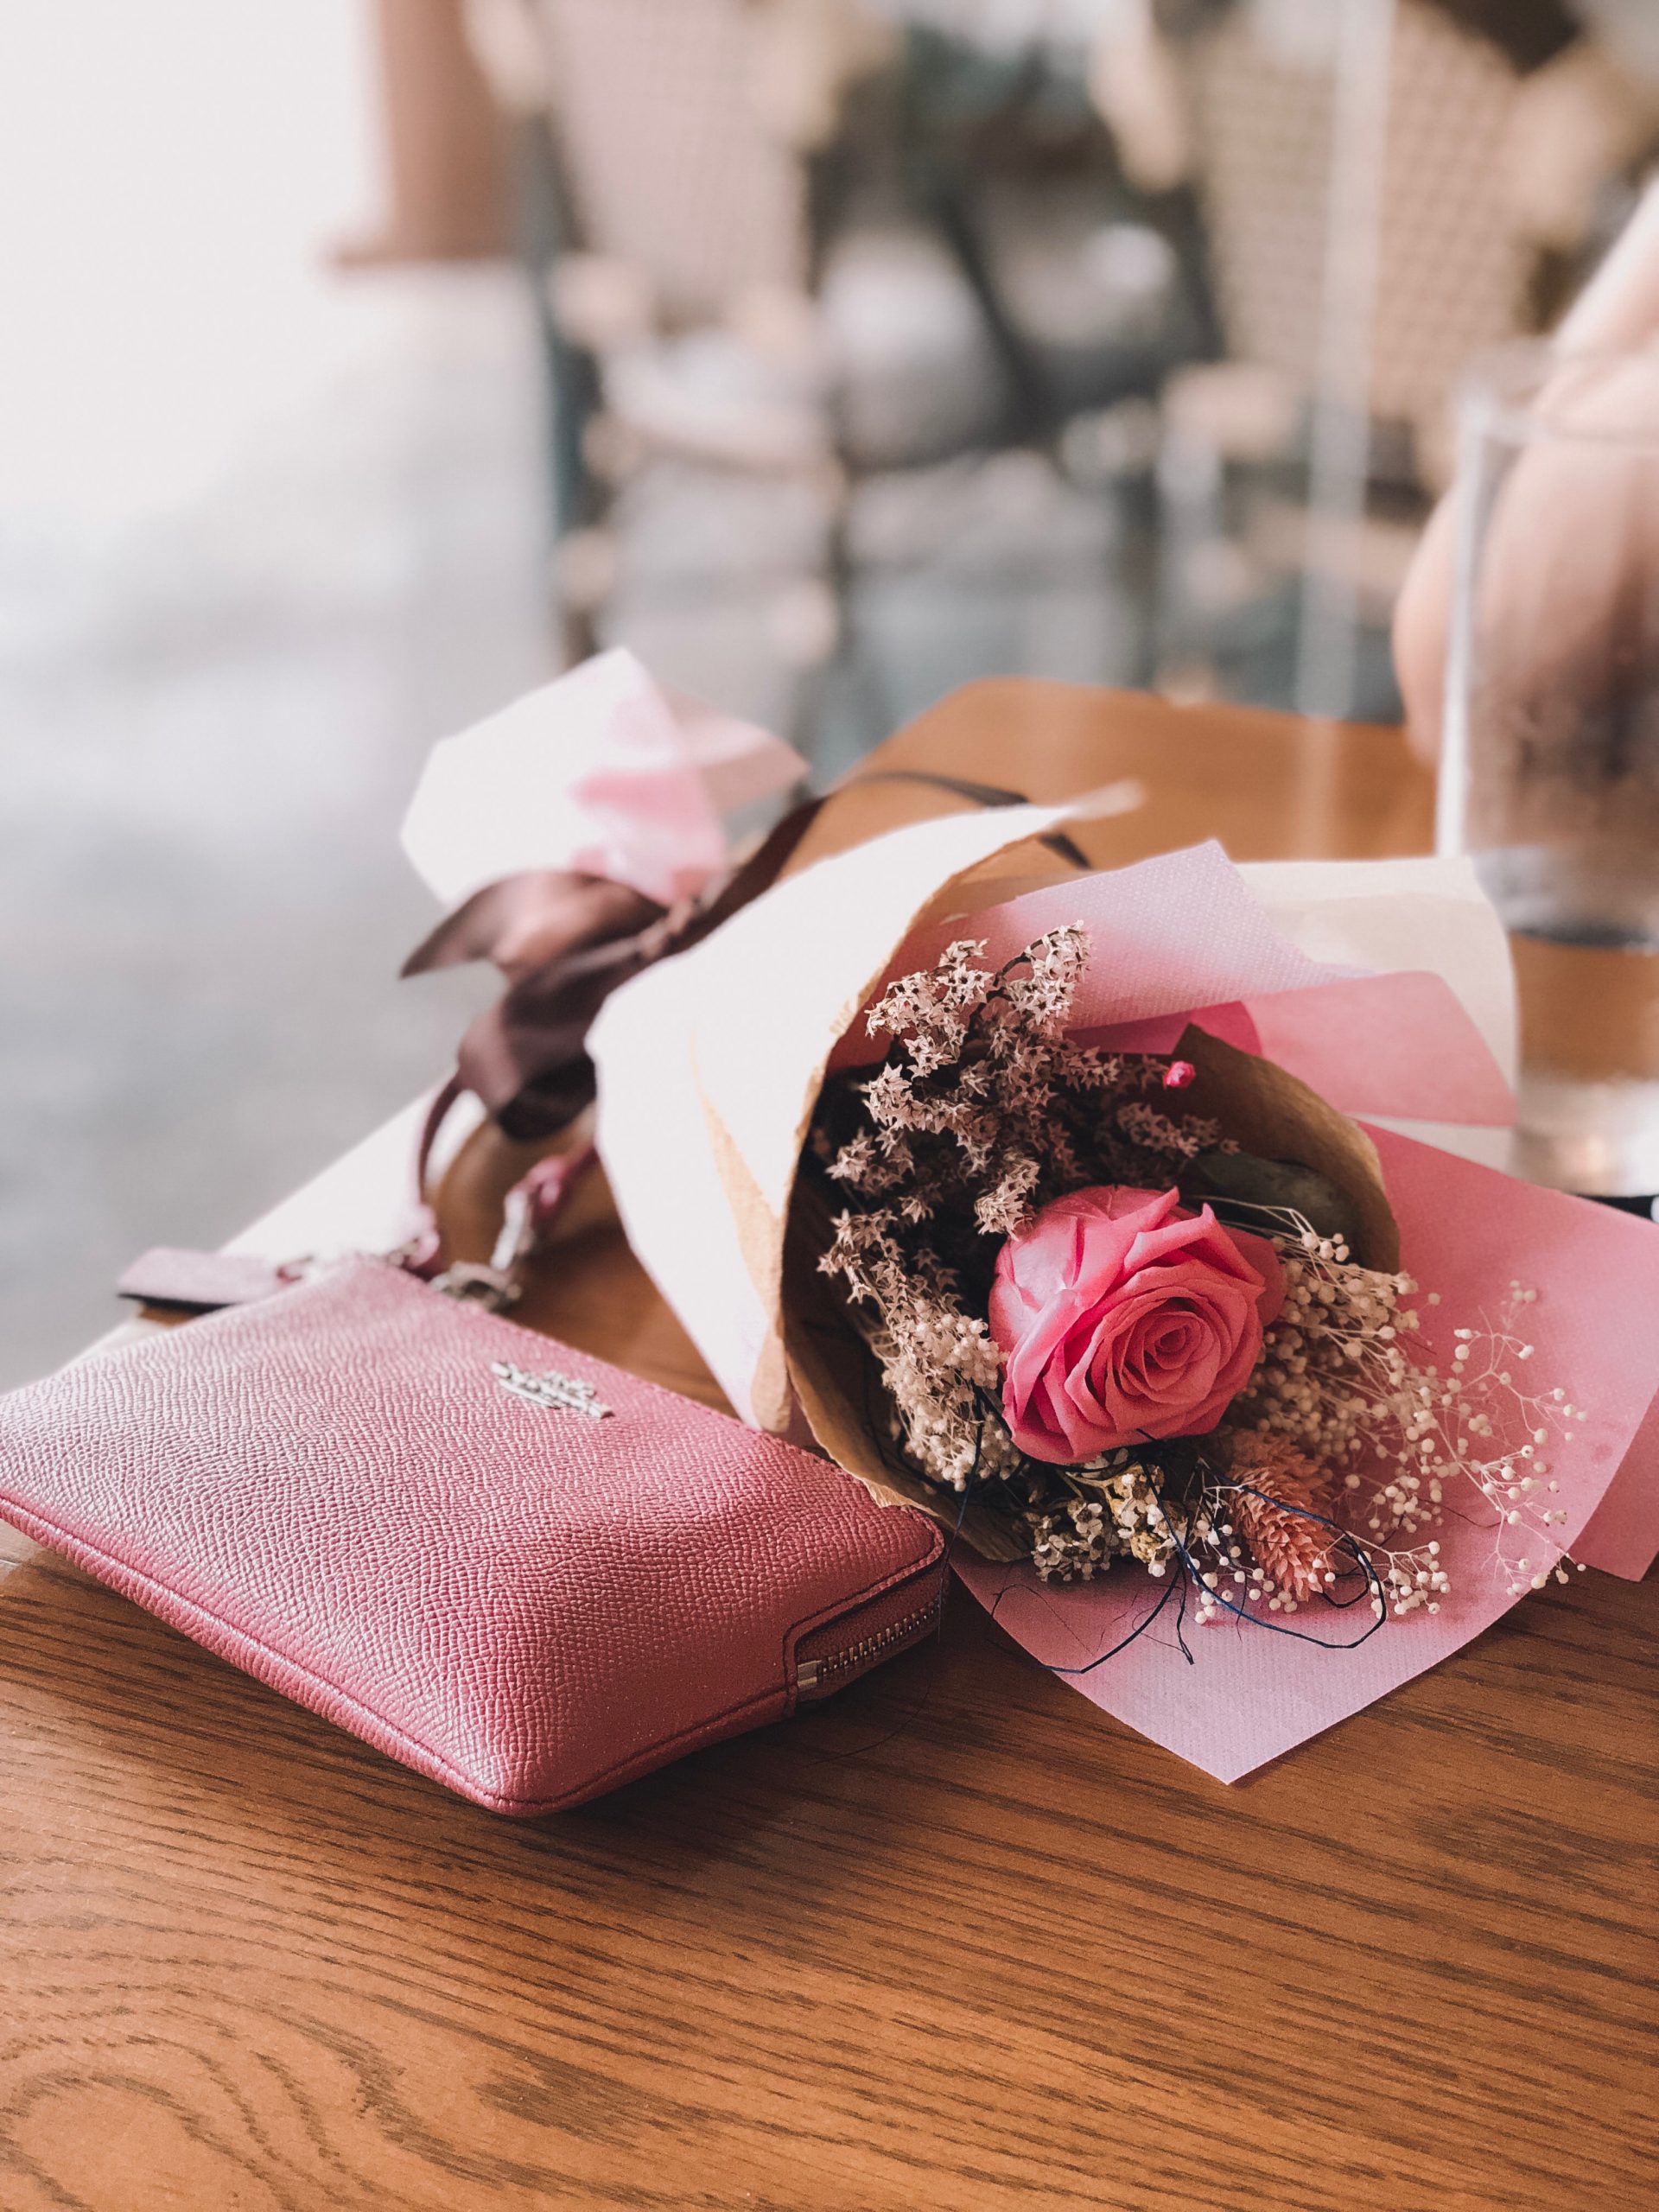 10 Black Women-Owned Businesses to Shop This Valentine’s Day